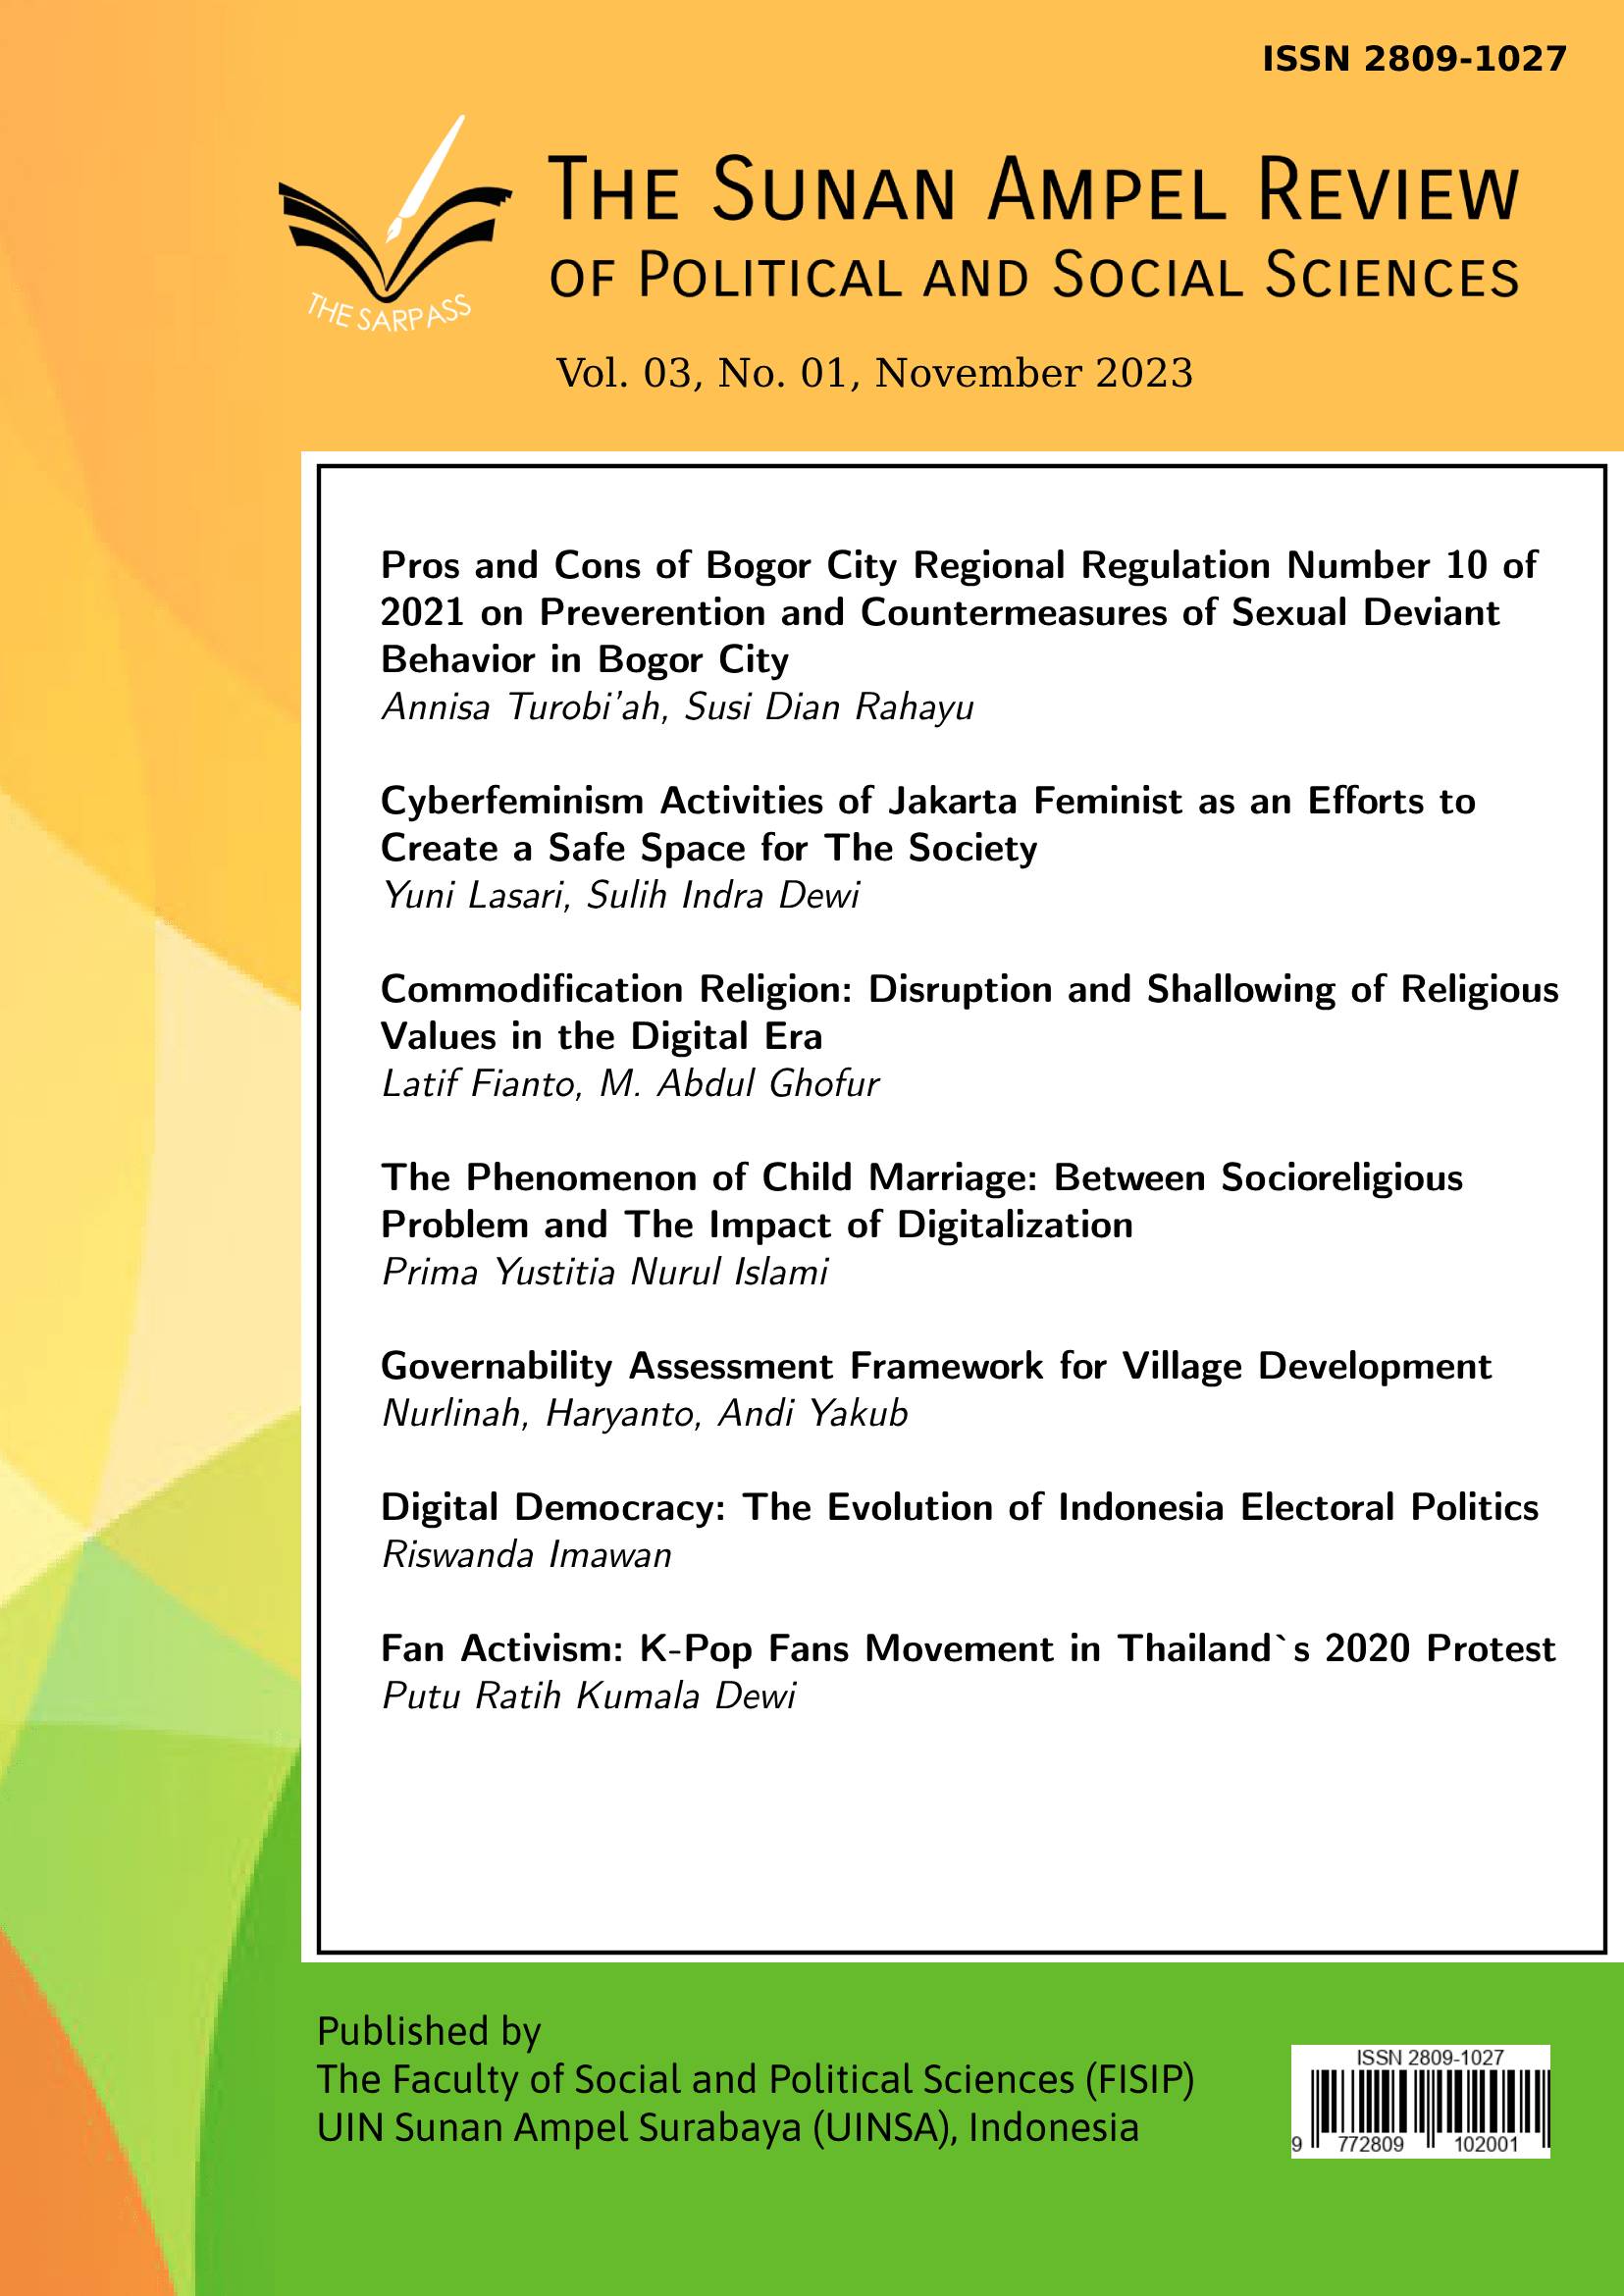 					View Vol. 3 No. 1 (2023): The Sunan Ampel Review of Political and Social Sciences
				